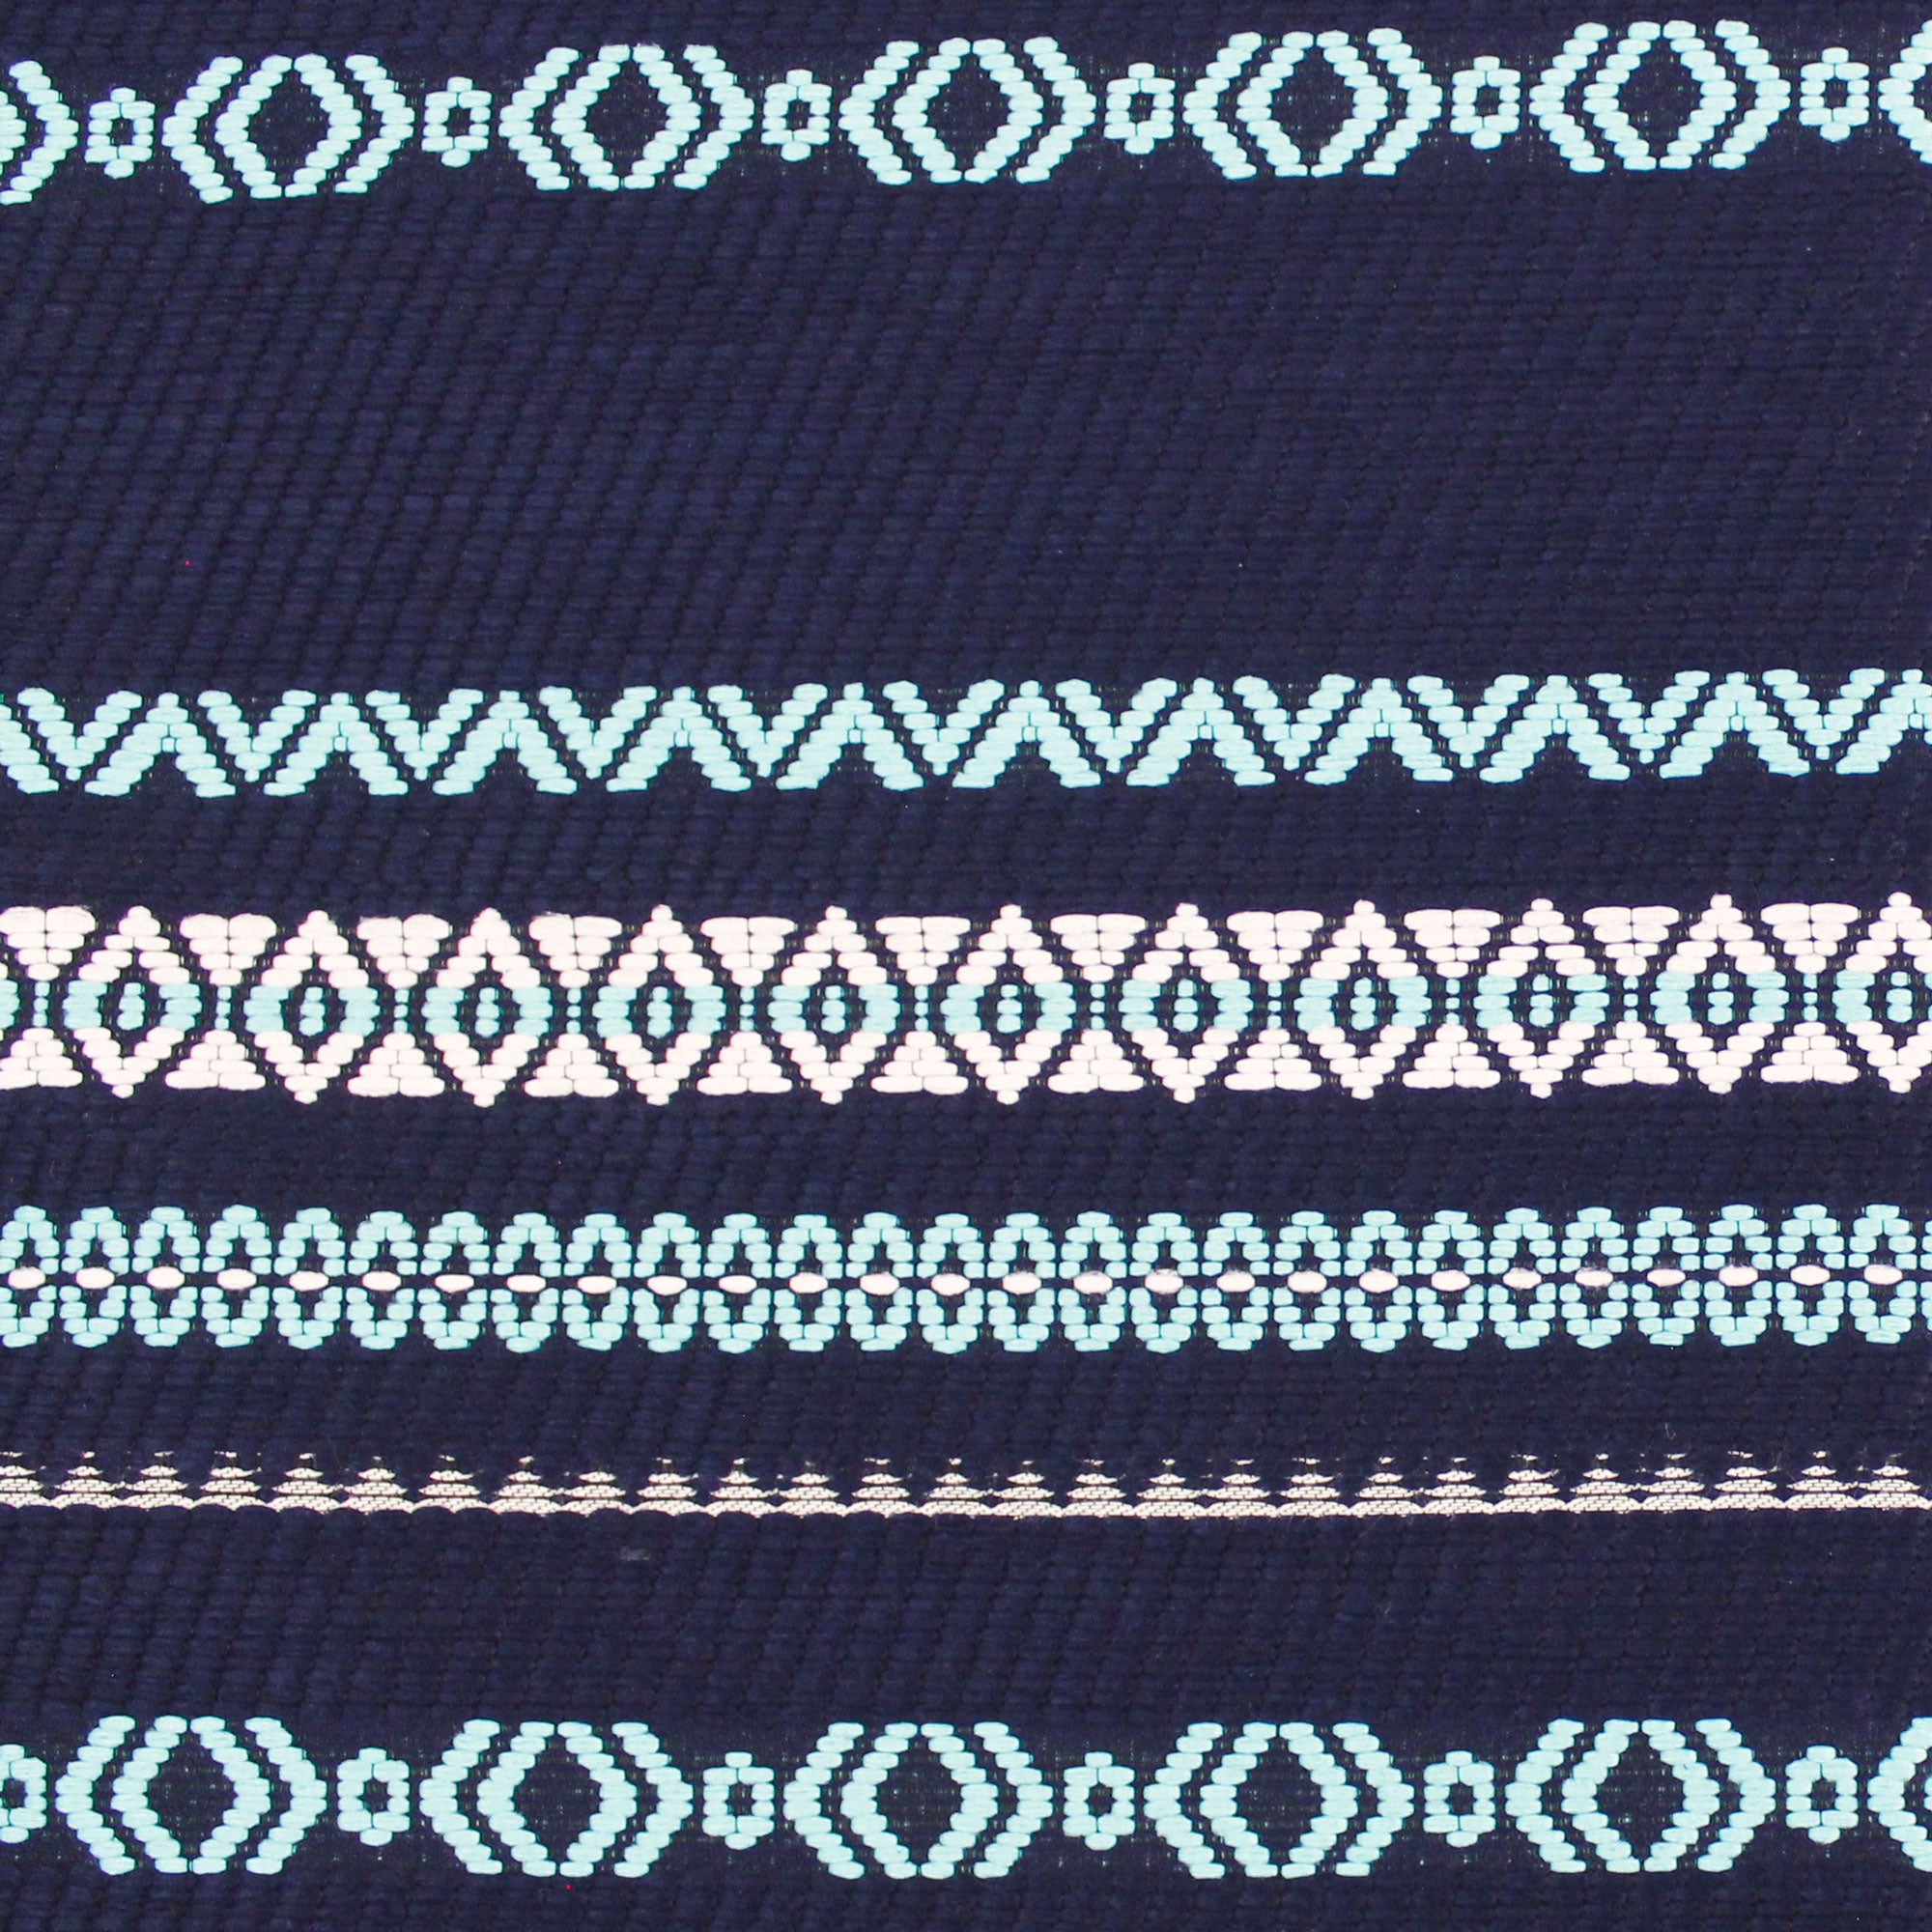 Cotton jacquard fabric with turquoise and white graphic patterns